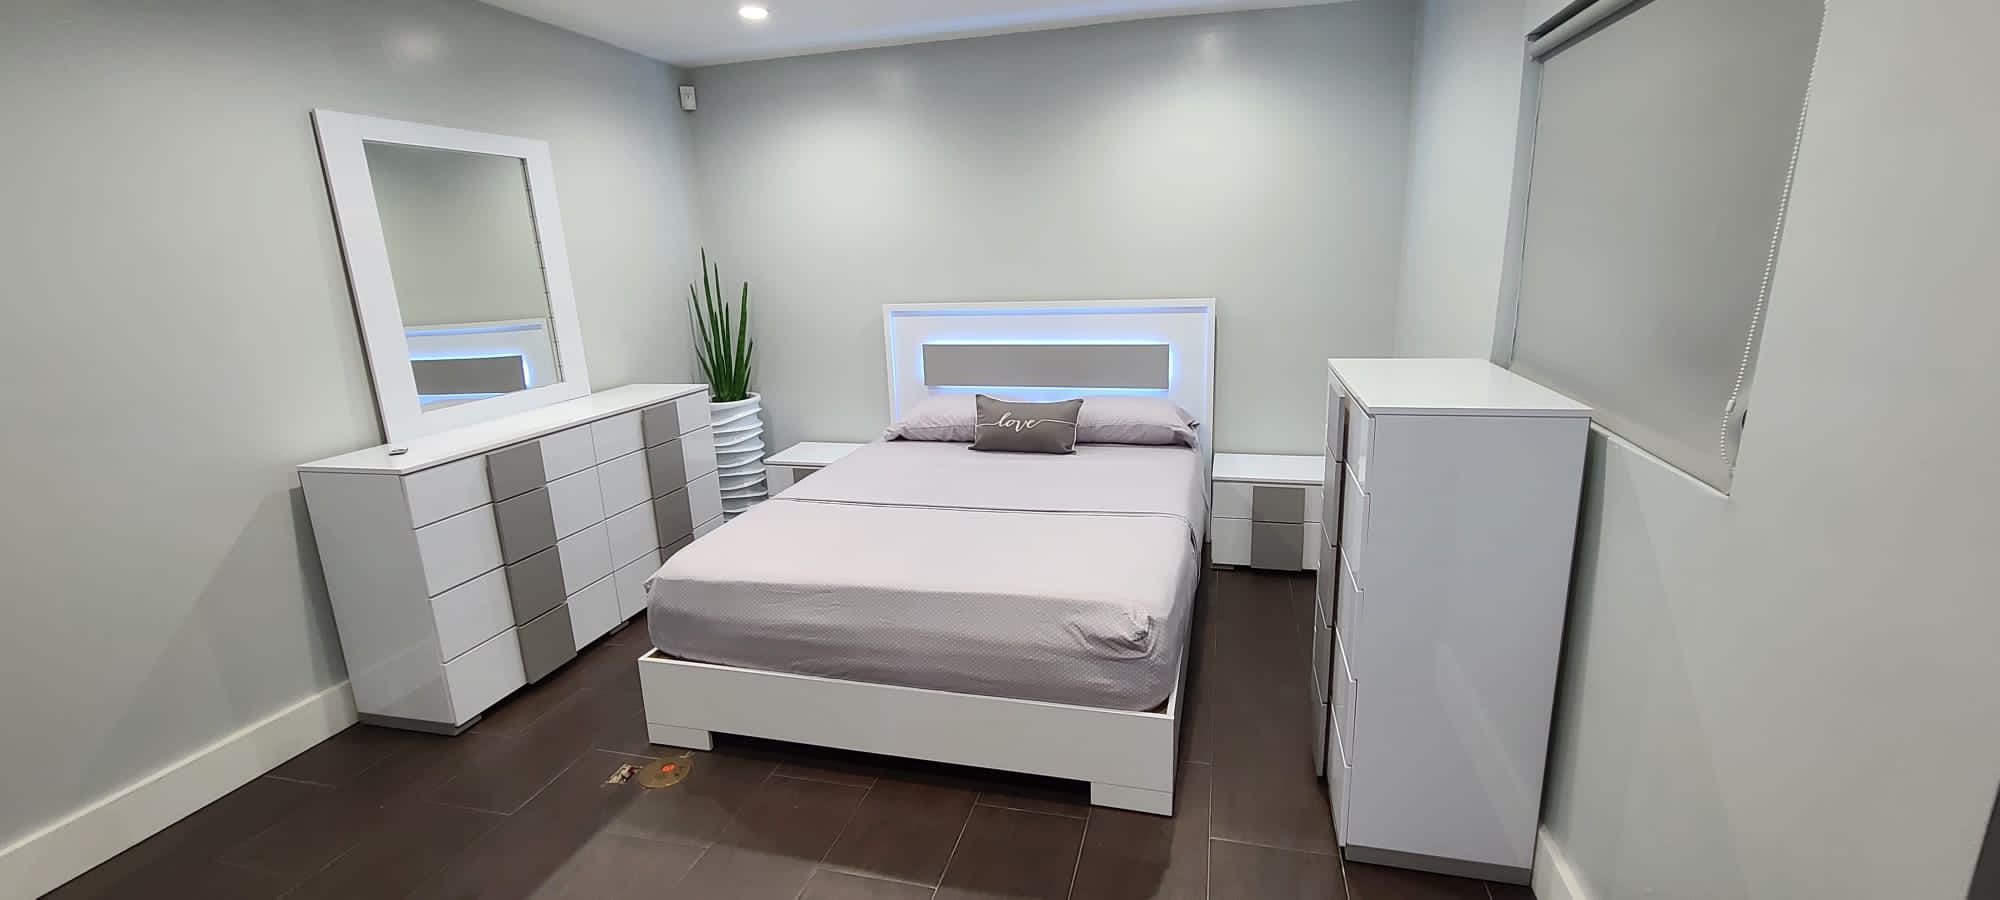 Bedroom Set🤩Ask For The Prices. Totally New